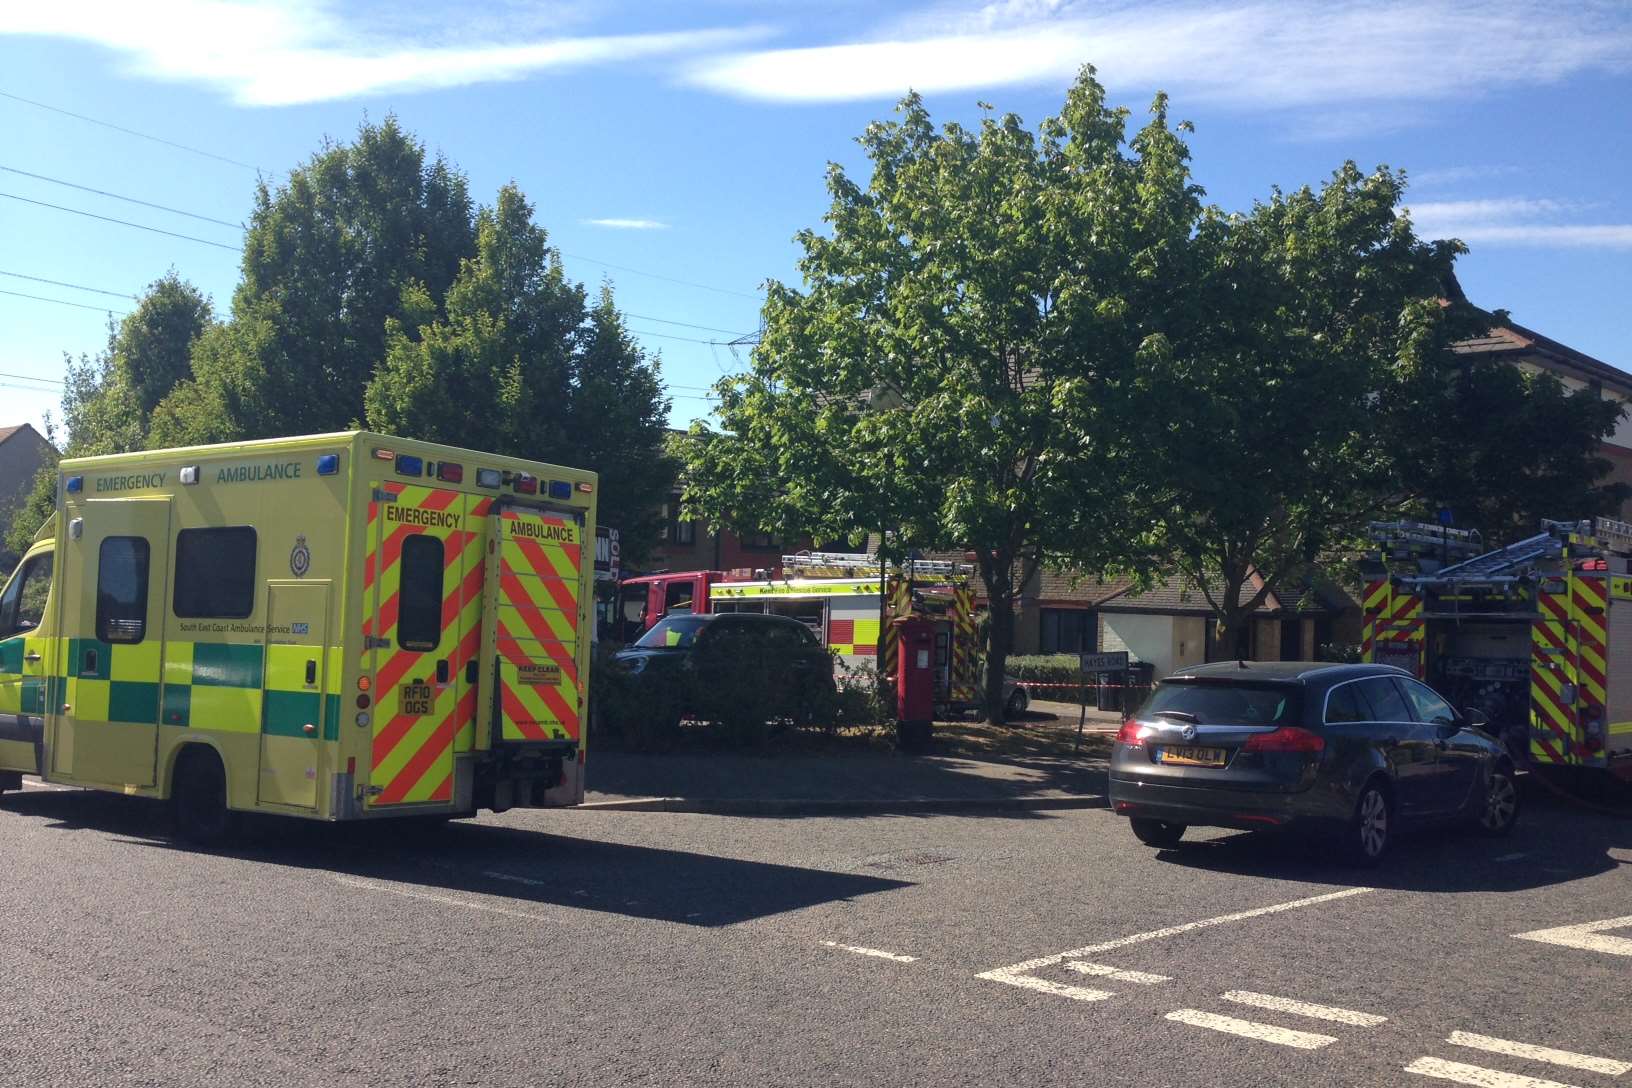 Firefighters and an ambulance were called to the scene of the ground floor flat fire.